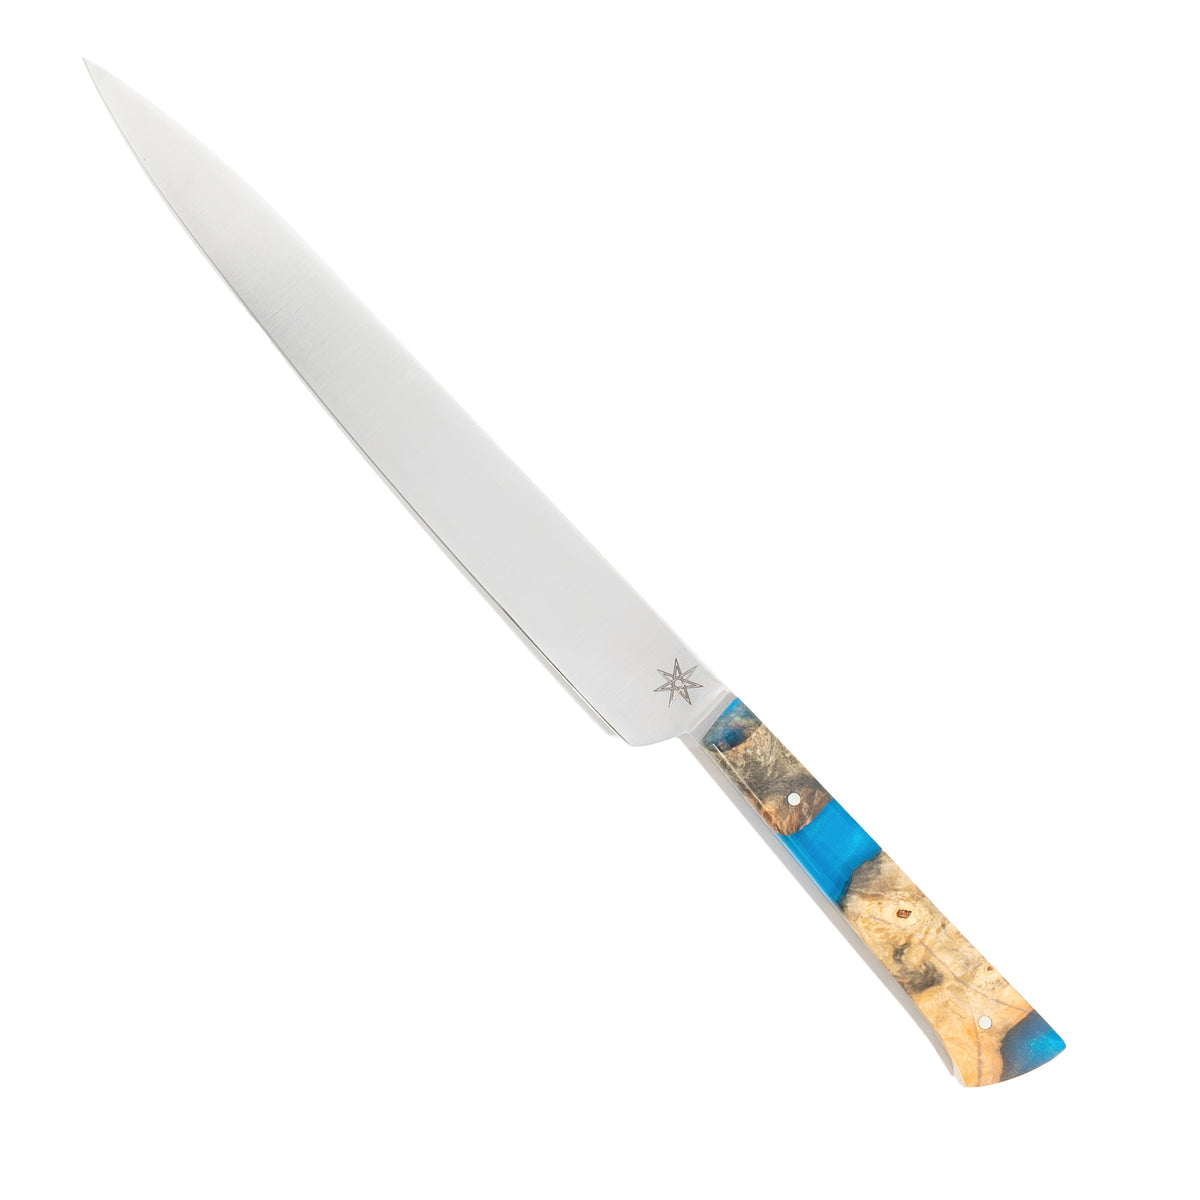 Town Cutler Tahoe Bliss Slicer Carving Knife. Nitro-V stainless steel blade with blue and buckeye burl handle.